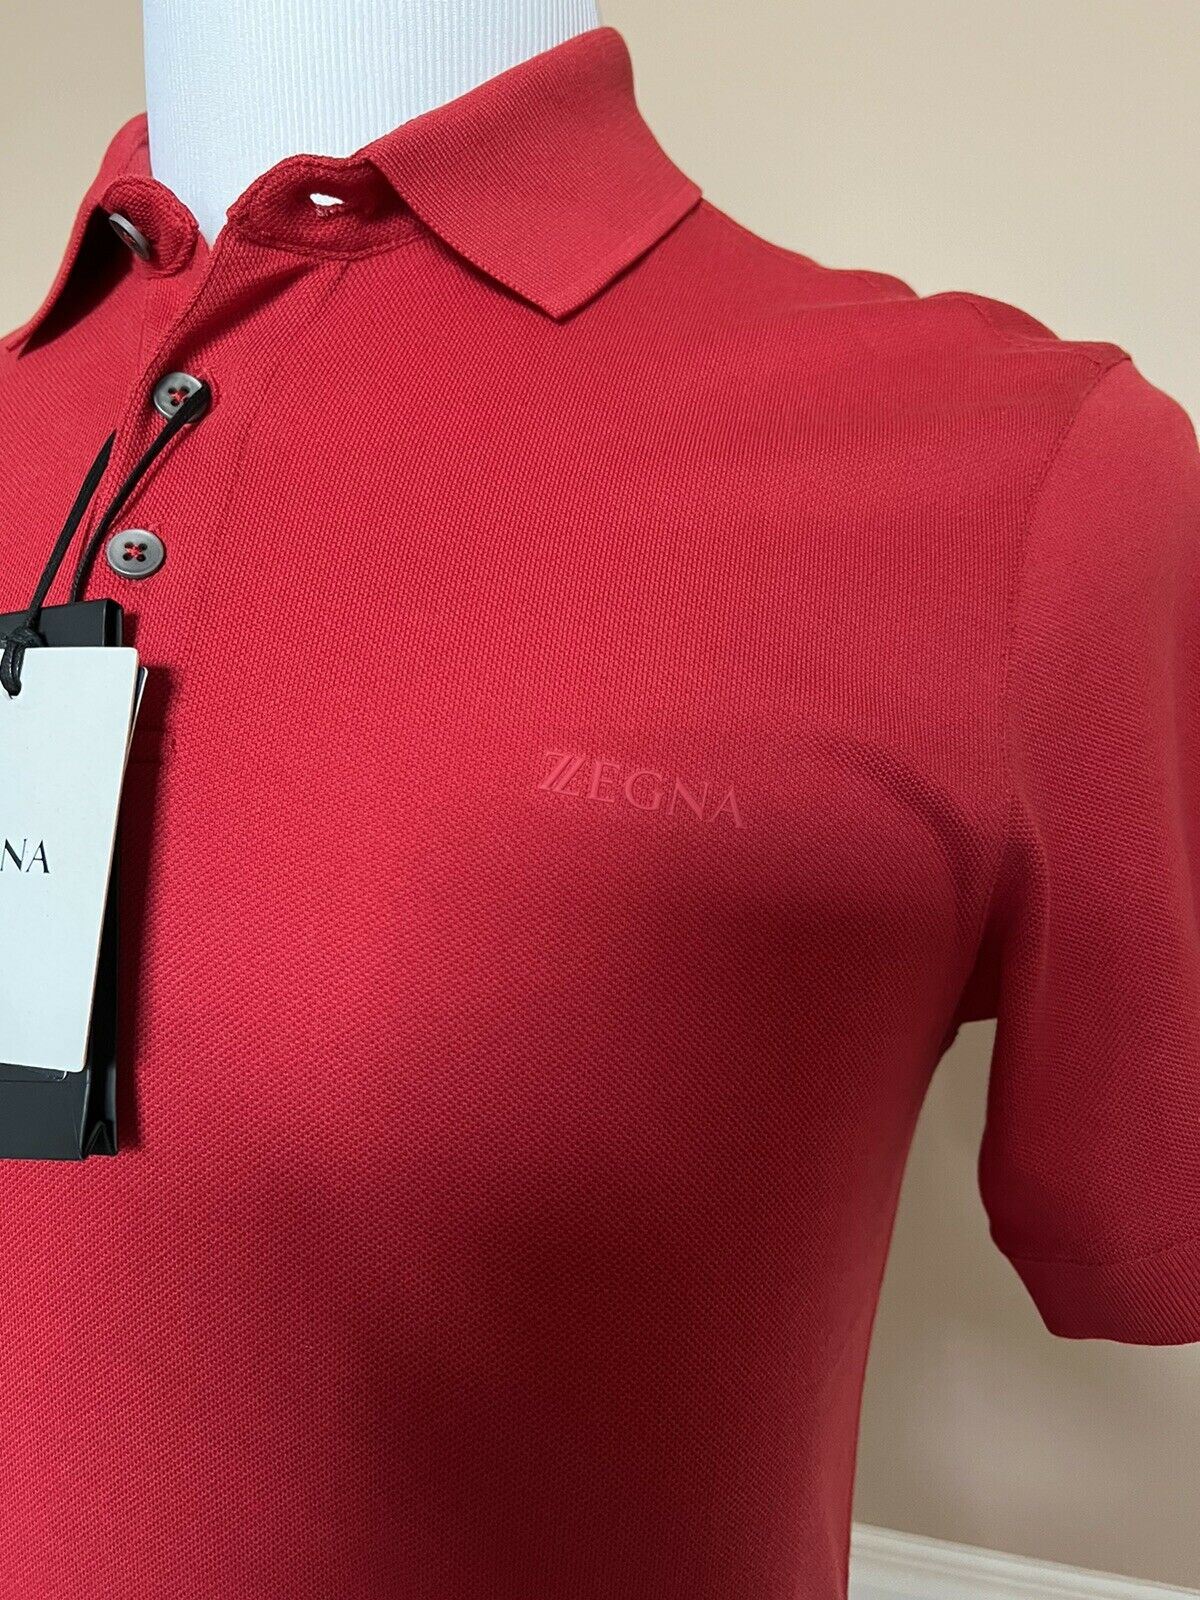 NWT $375 ZEGNA Cotton Shirt Sleeve Polo Shirt Red XS ZZF600